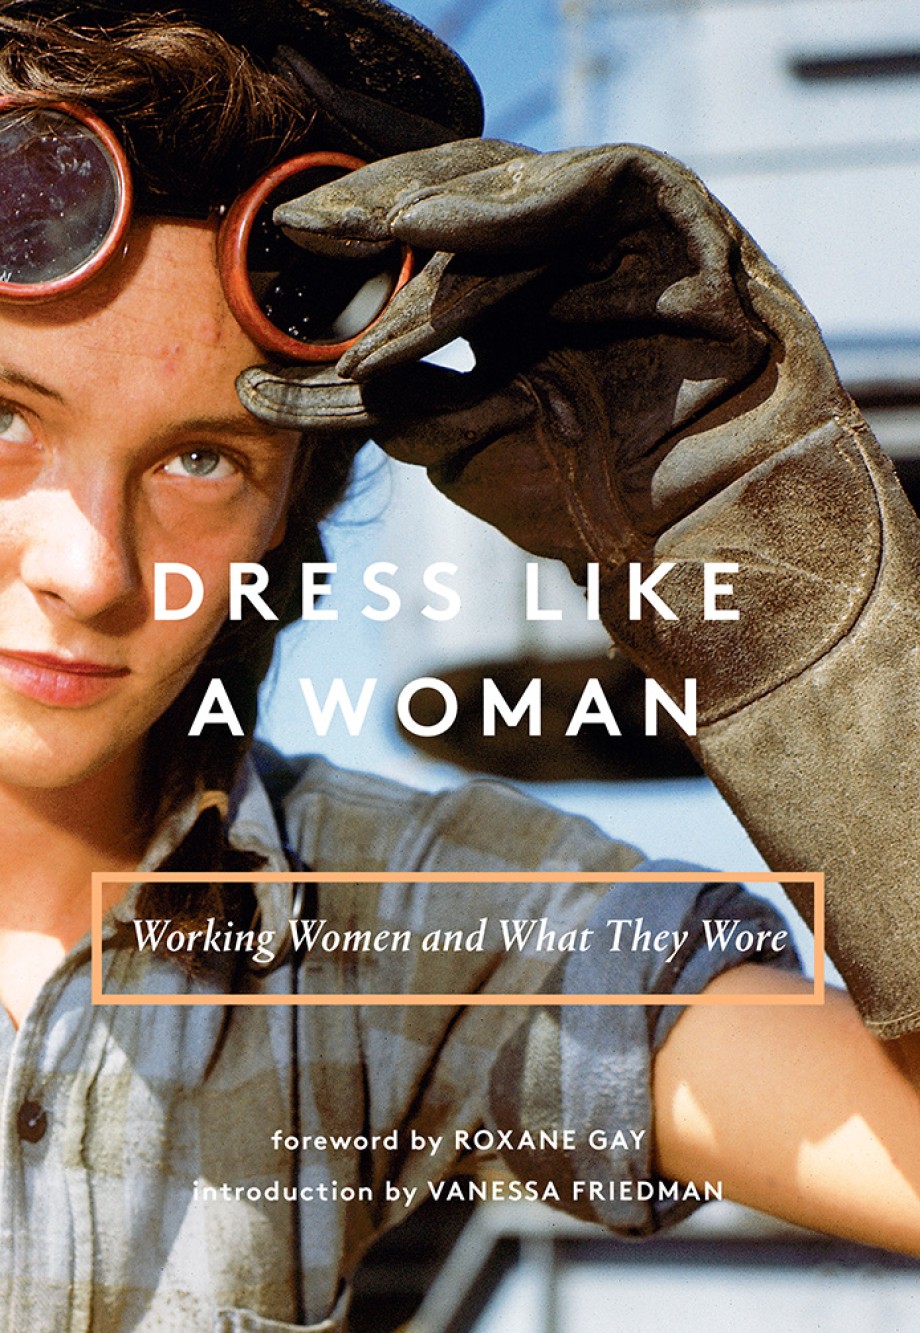 Dress Like a Woman Working Women and What They Wore